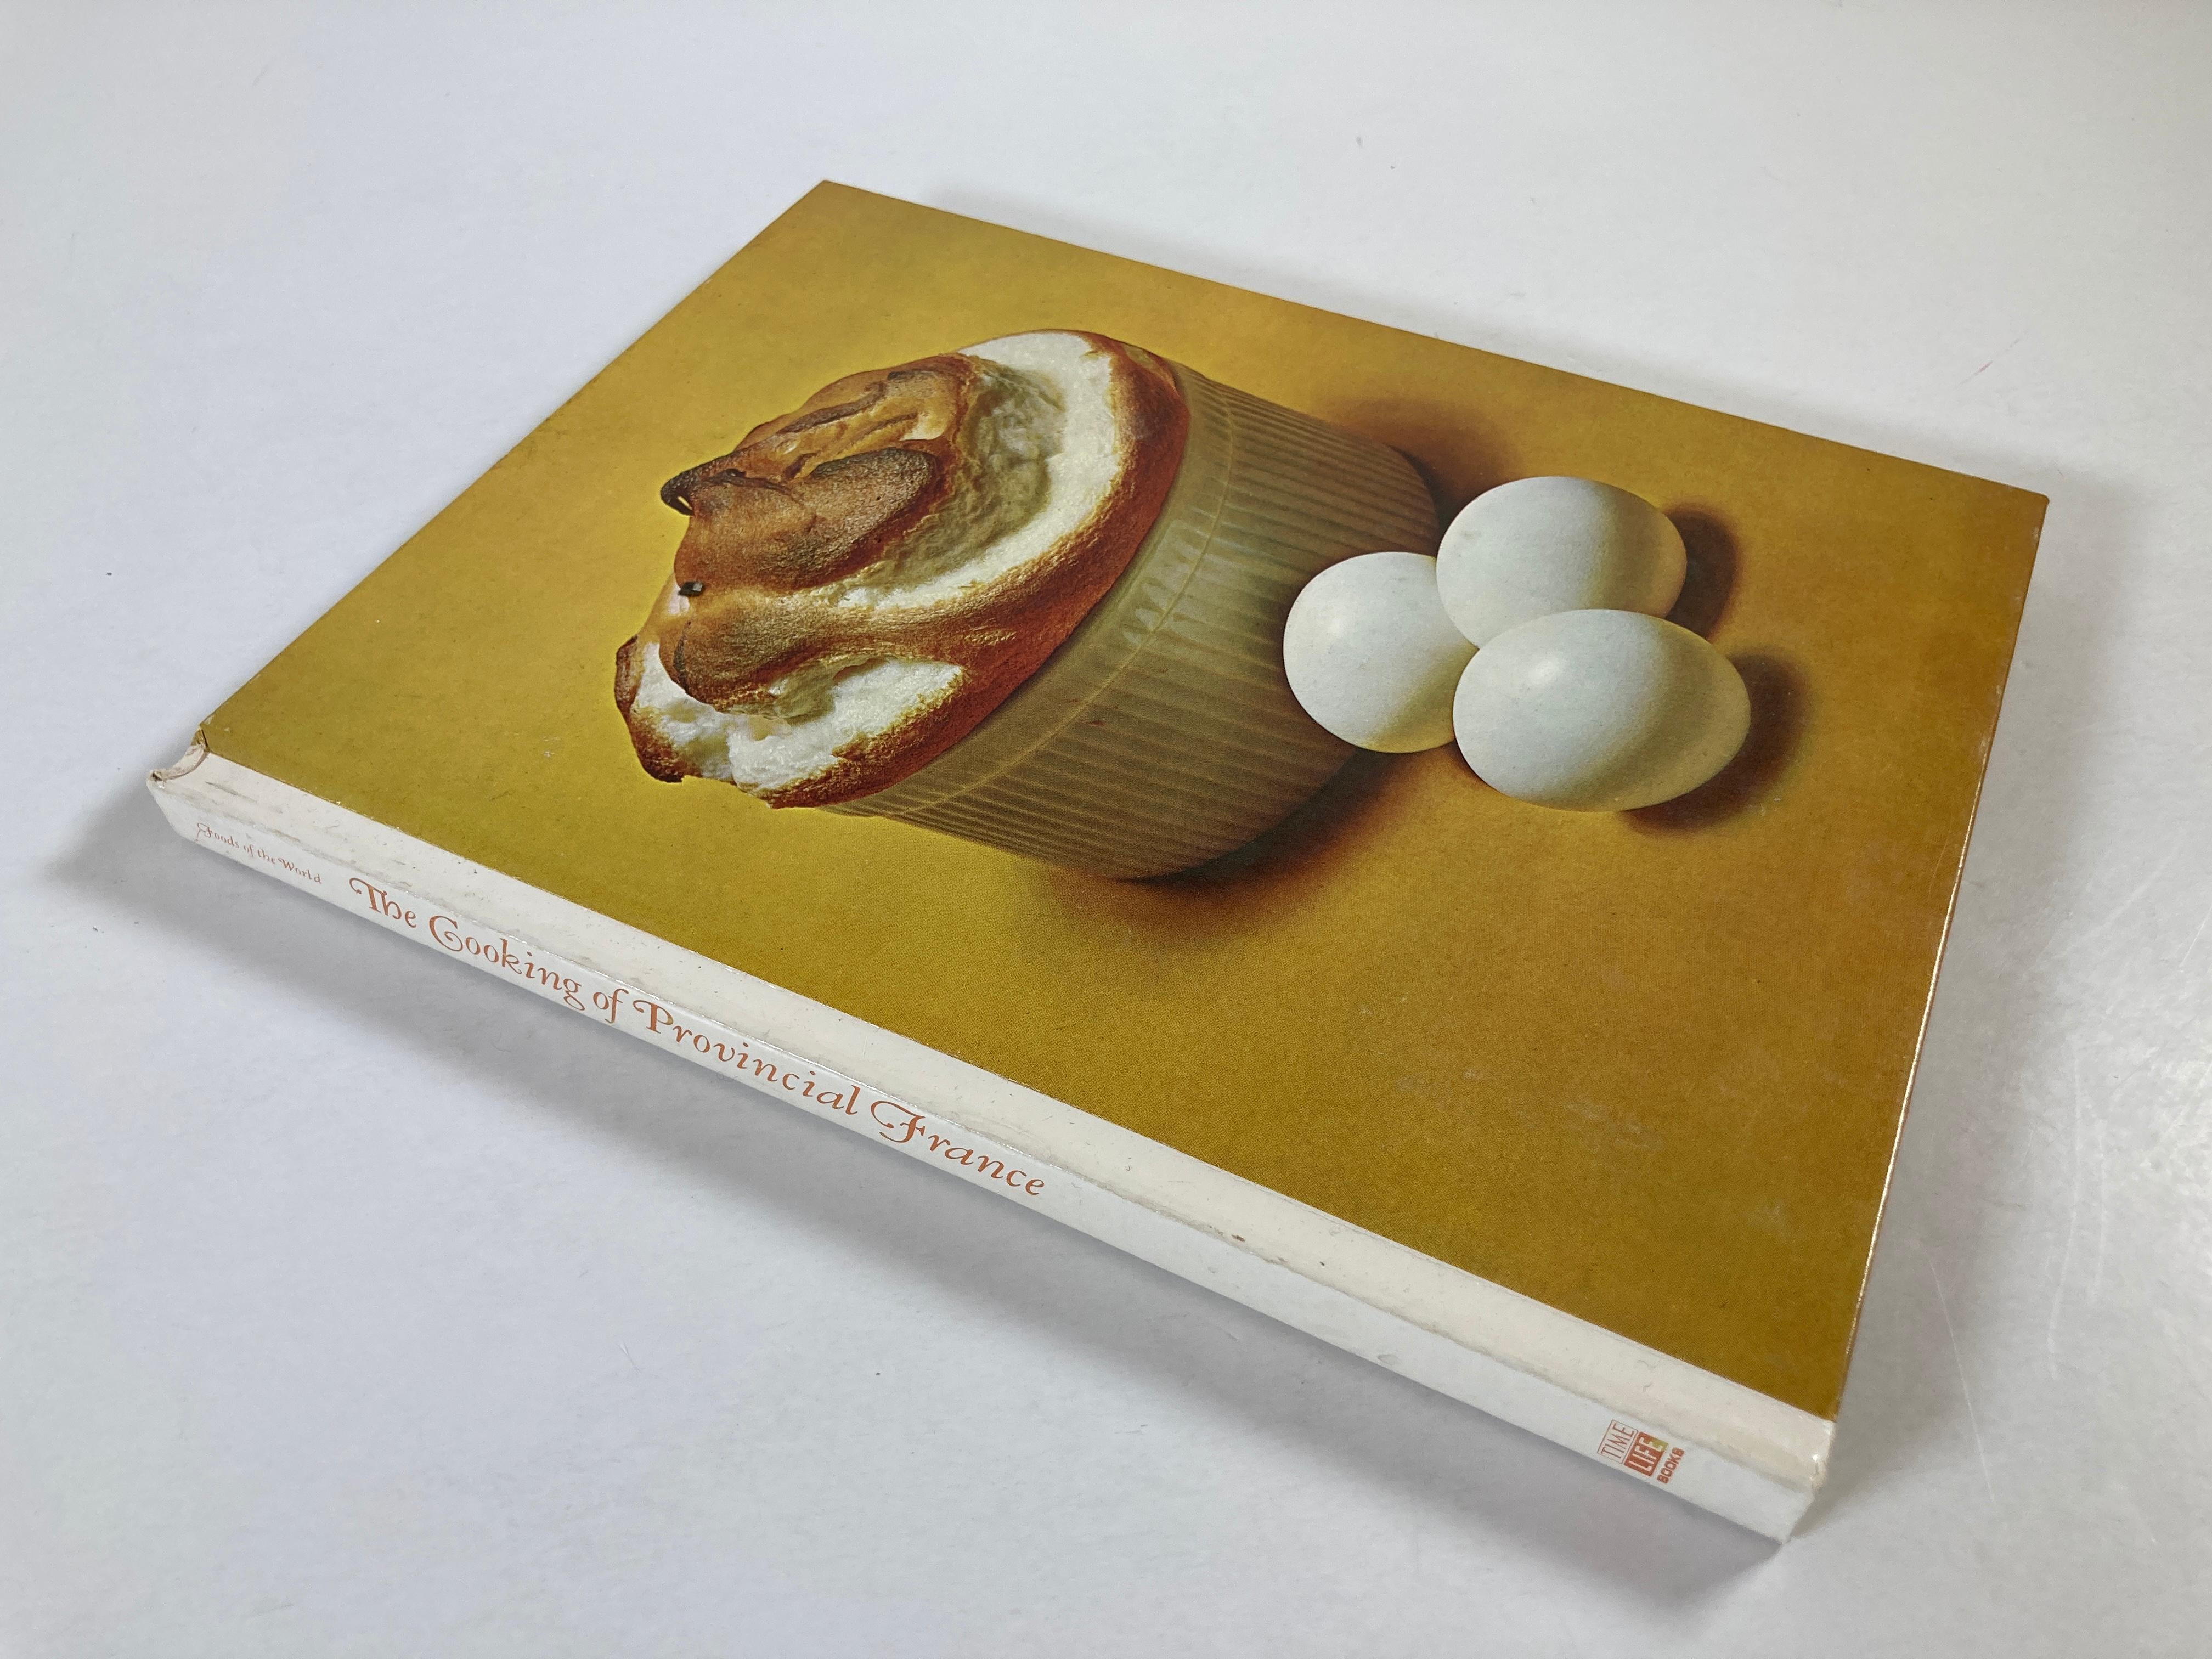 The Cooking of Provincial France hardcover 
by M. F. K. Fisher (Author), Mark Kauffman (Photographer)
Title: Recipes: The Cooking of Provincial France
Publisher: Time-Life Books
Publication Date: 1985
Content Chapters include: 